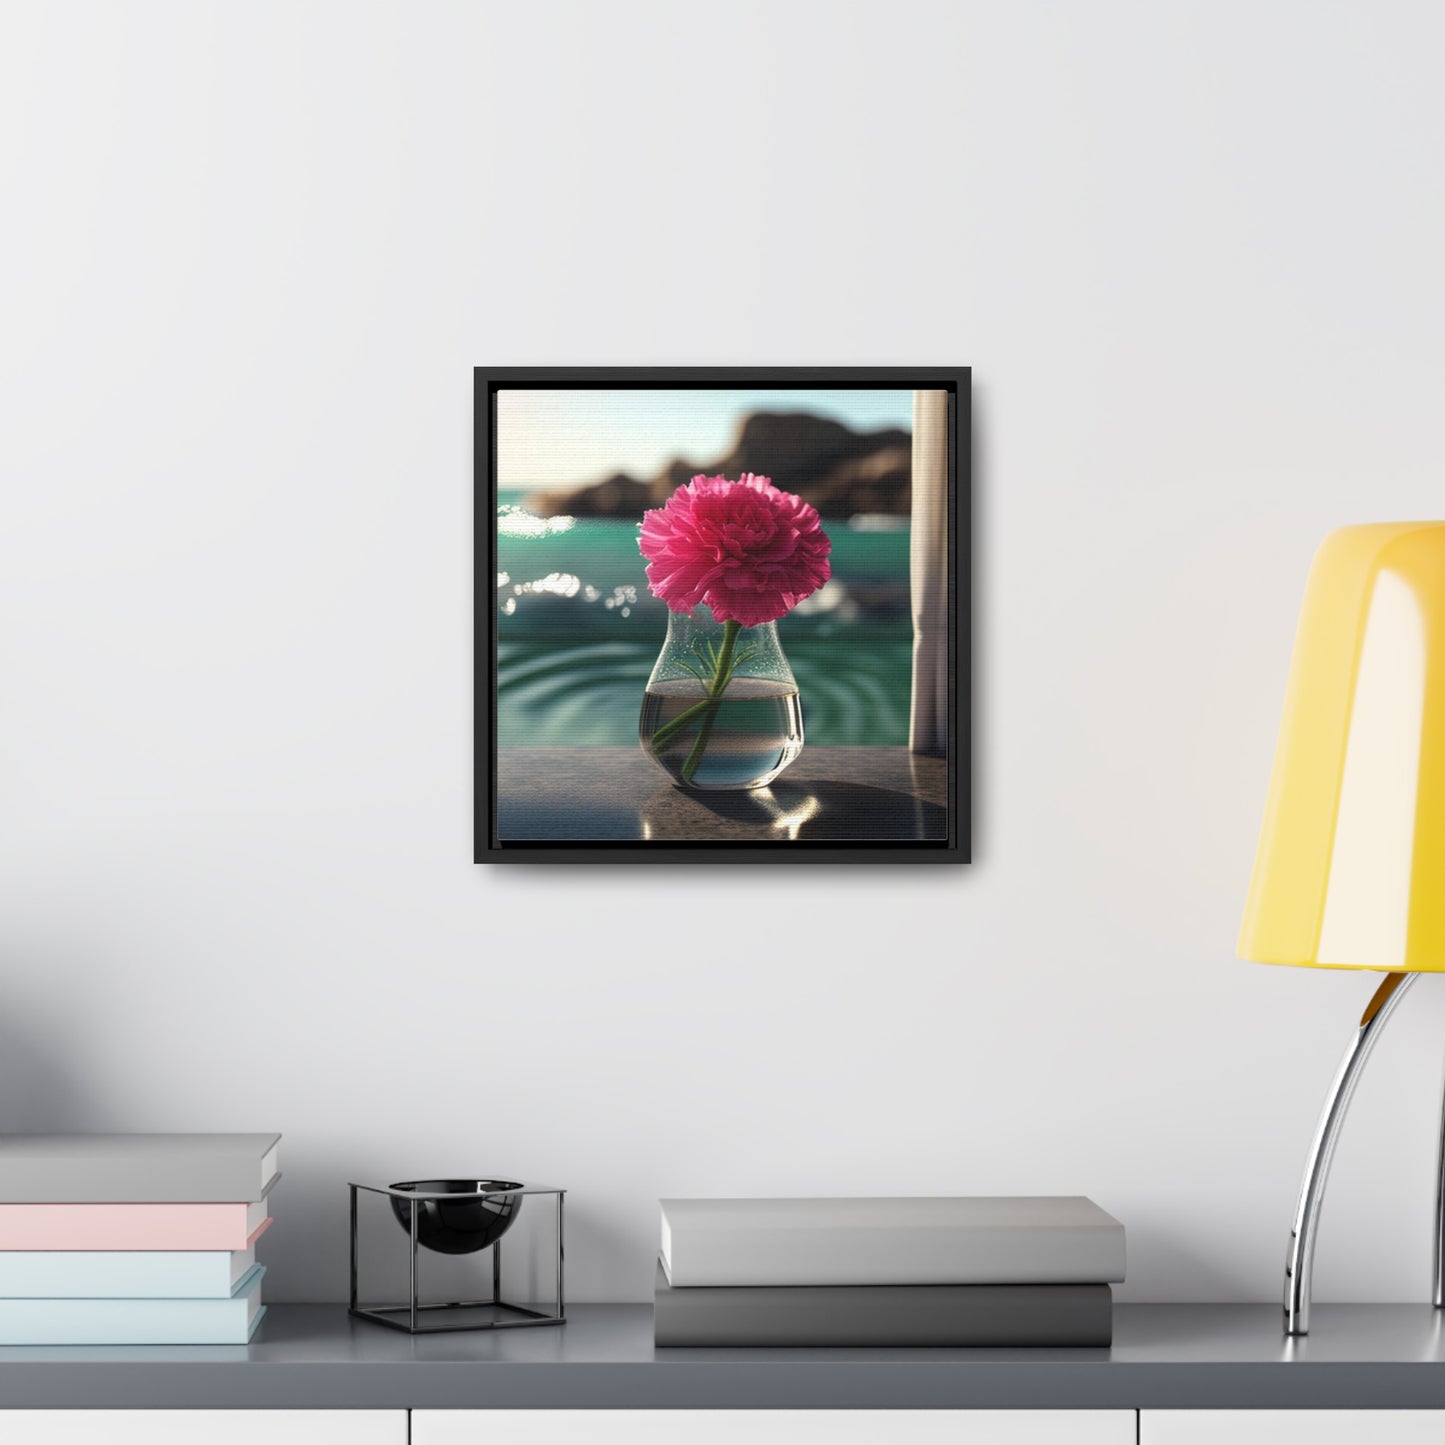 Gallery Canvas Wraps, Square Frame Carnation 4